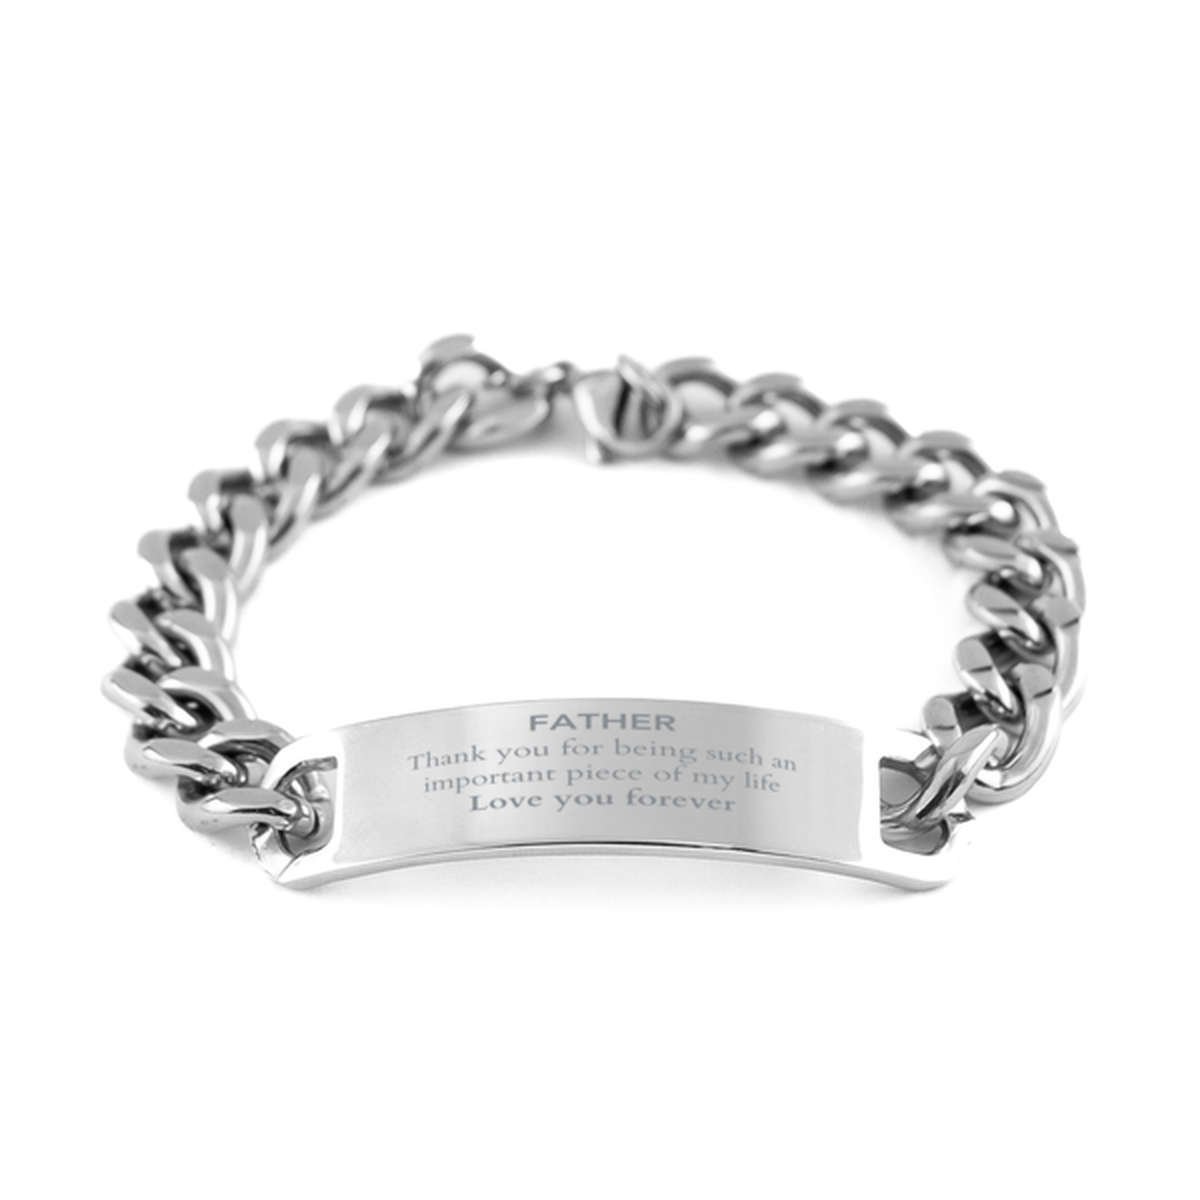 Appropriate Father Cuban Chain Stainless Steel Bracelet Epic Birthday Gifts for Father Thank you for being such an important piece of my life Father Christmas Mothers Fathers Day